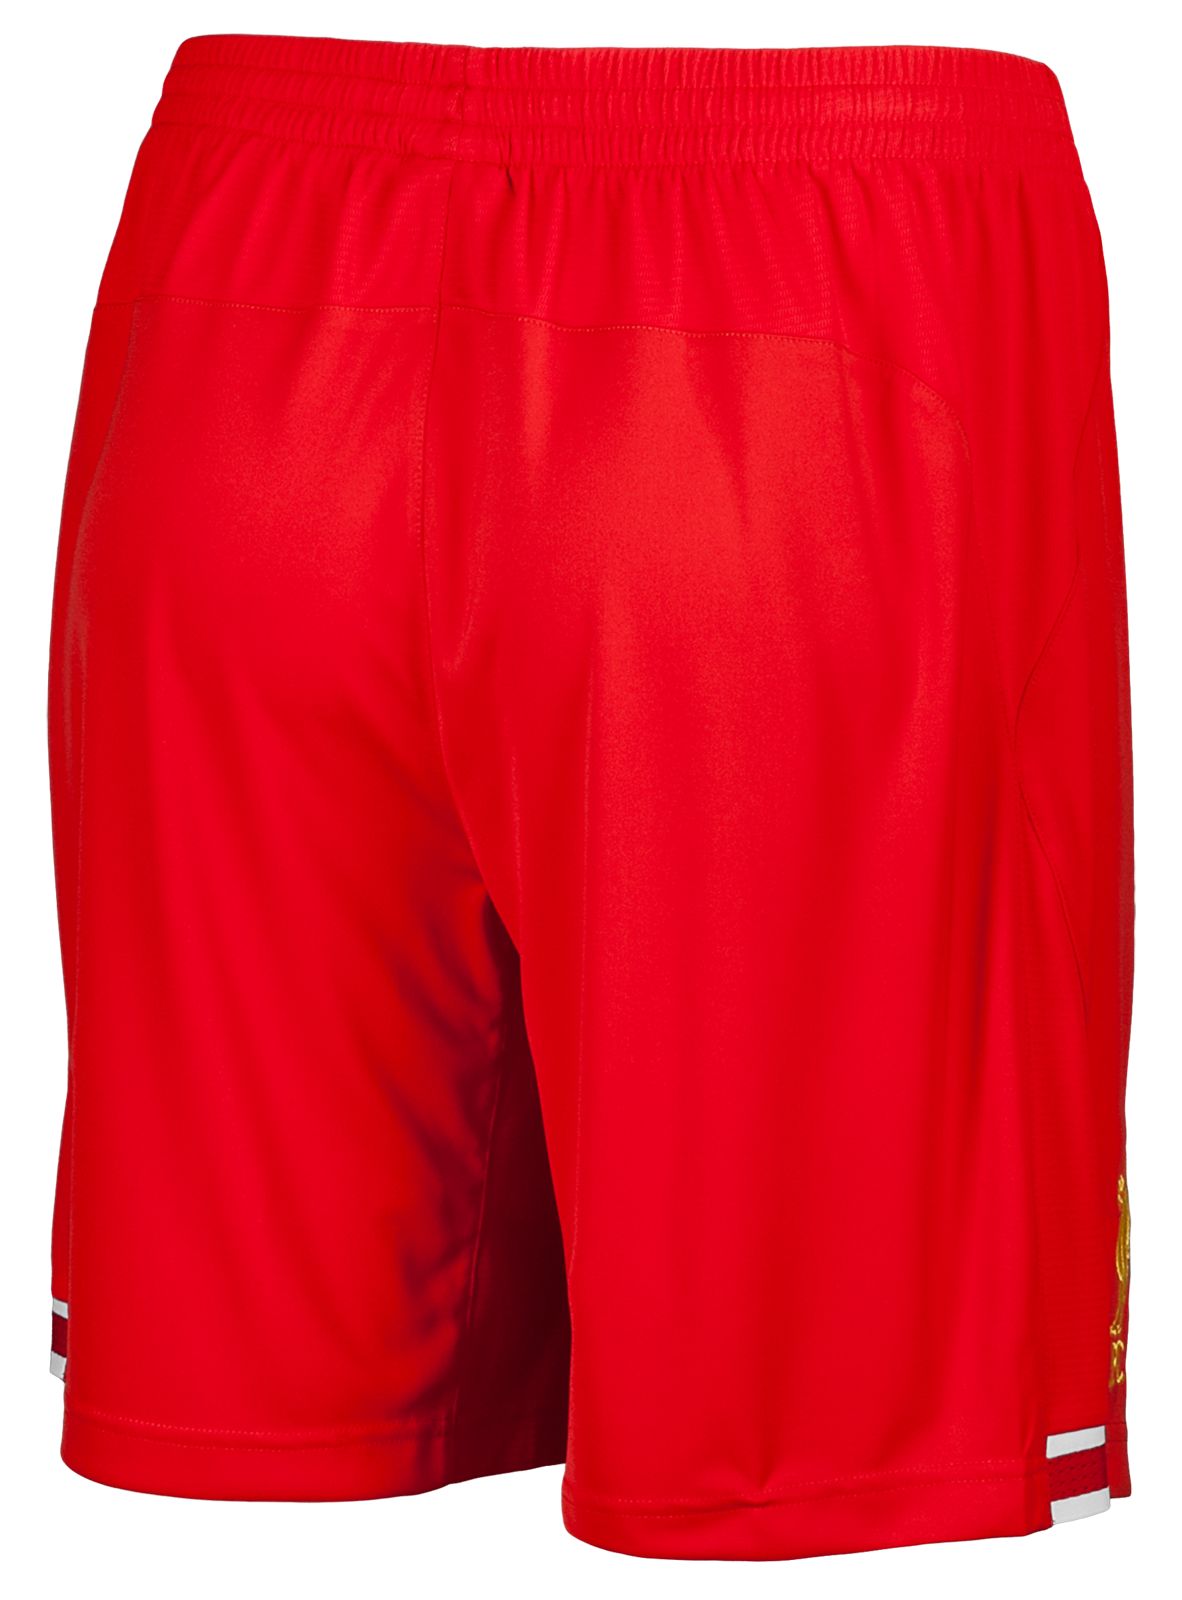 Liverpool Home Short 2013/14, High Risk Red with White & Amber Yellow image number 0